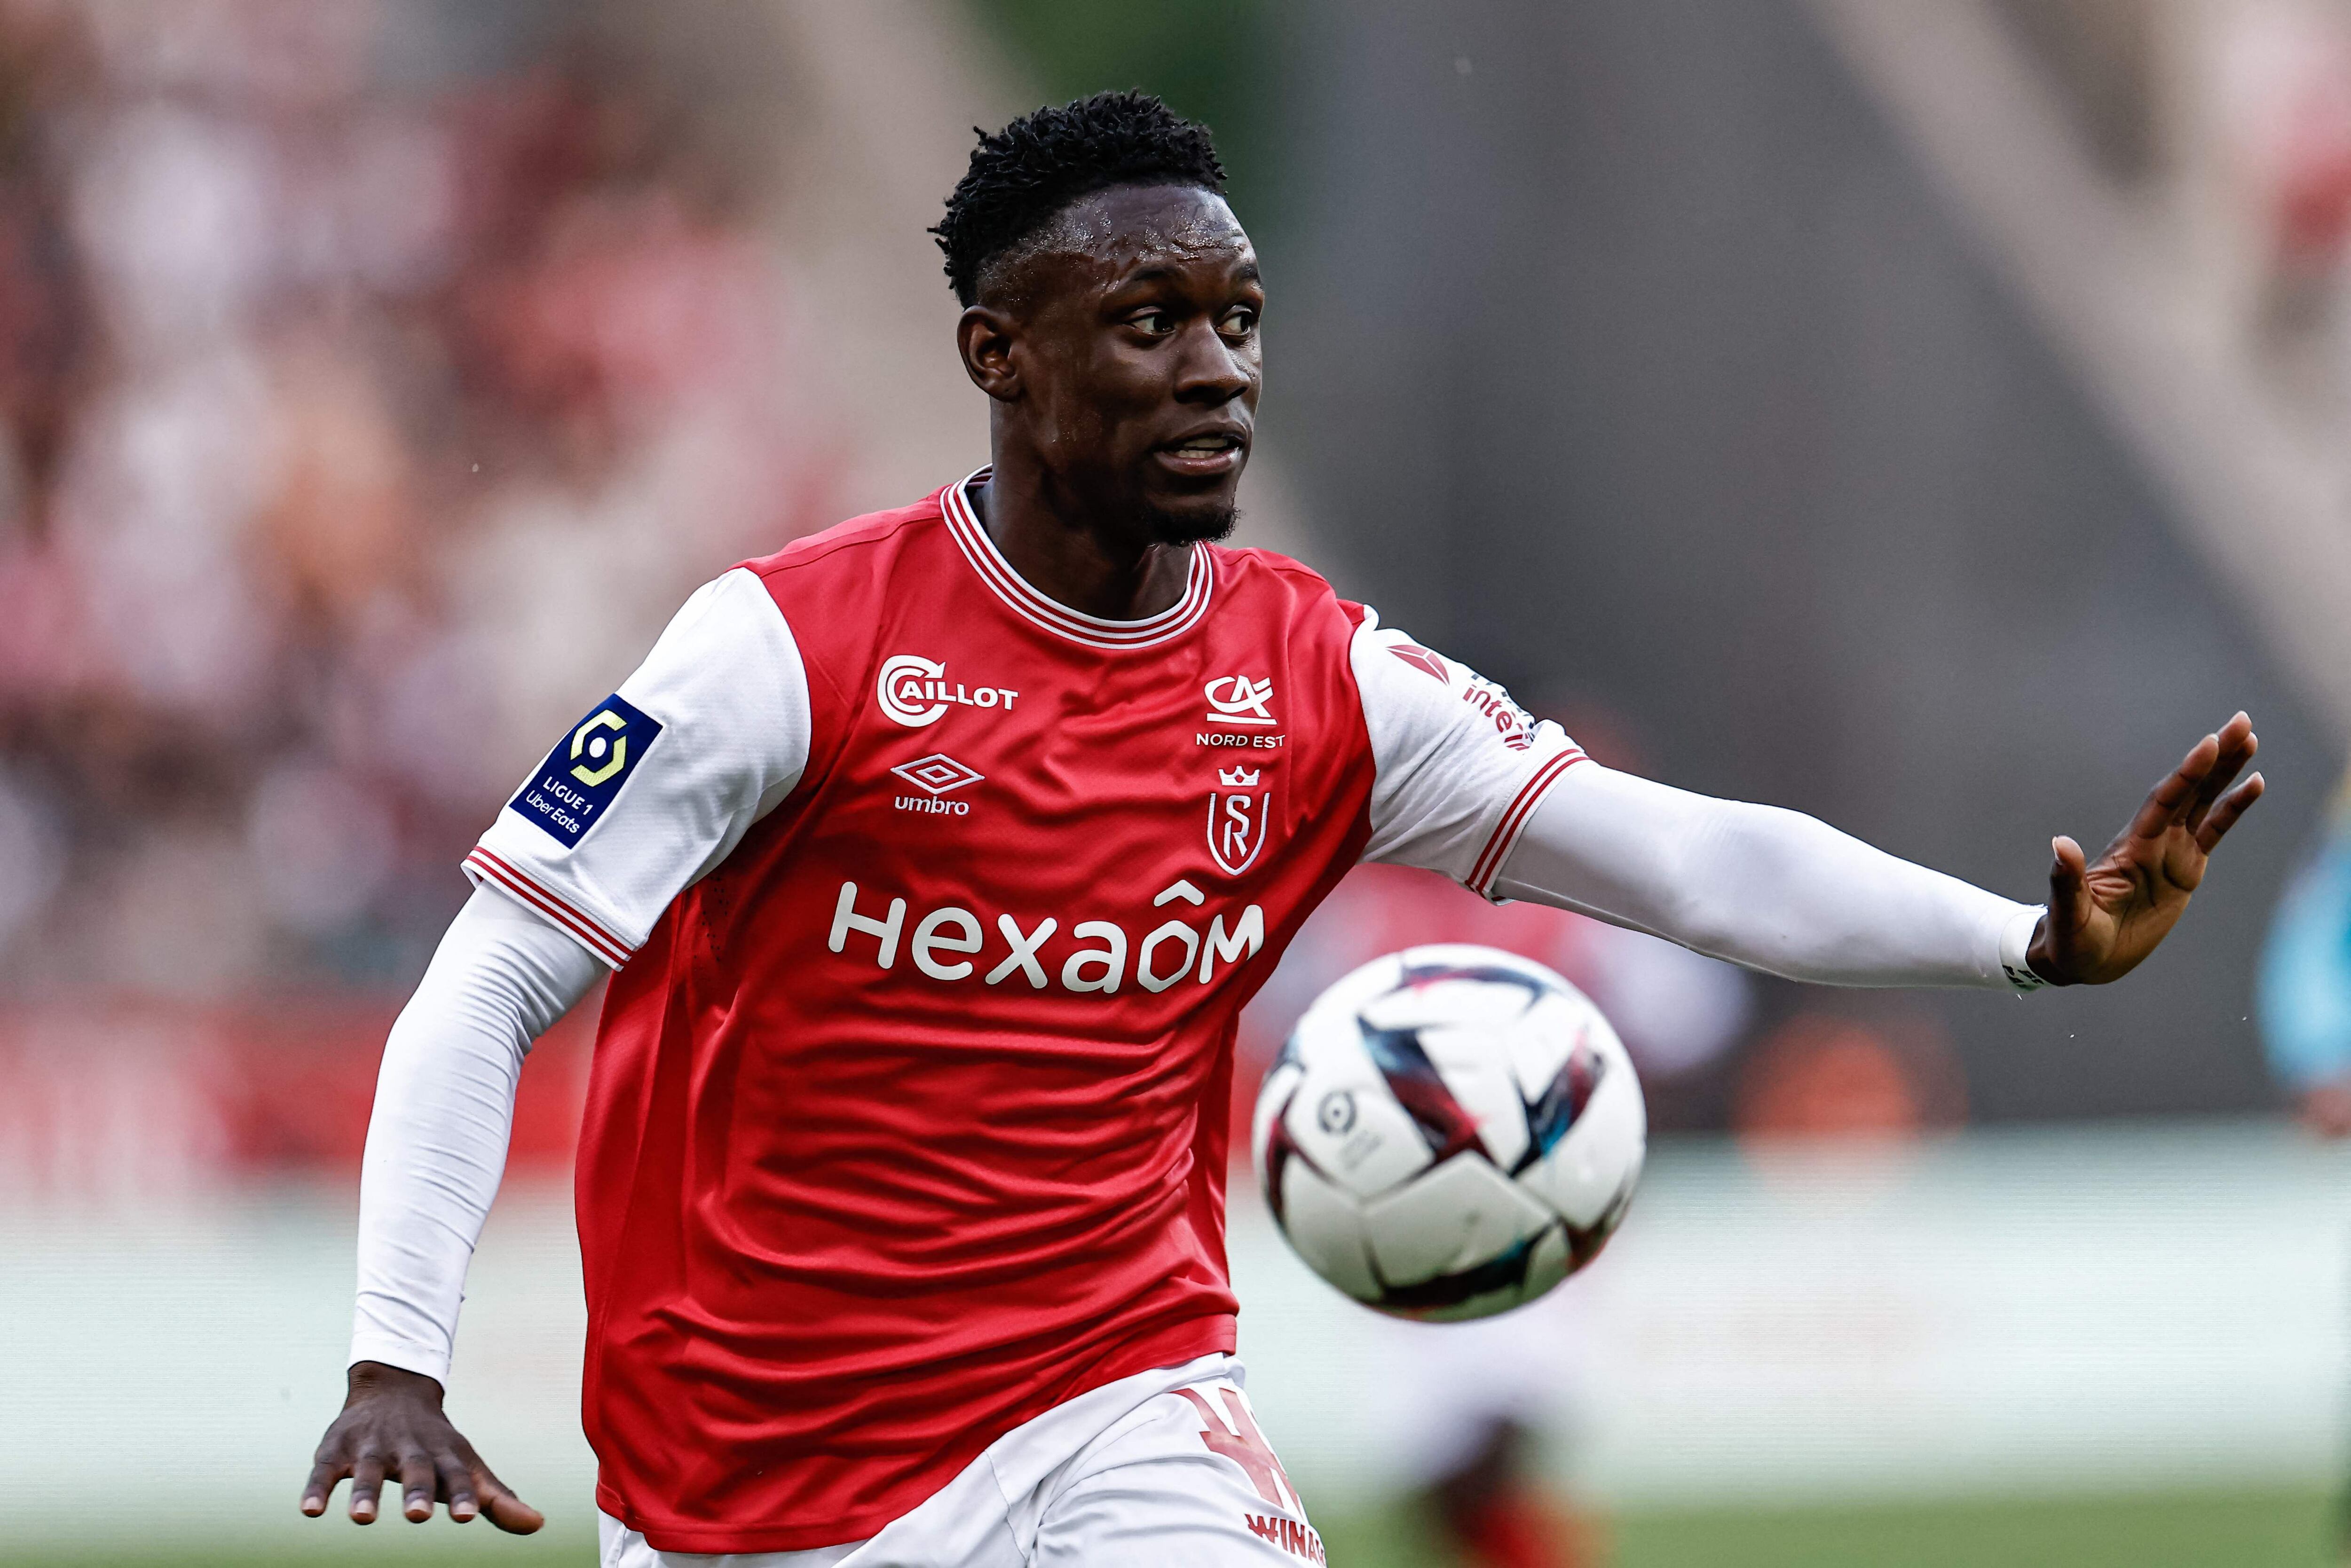 Reims' English forward Folarin Balogun controls the ball during the French L1 football match between Stade de Reims and Montpellier Herault SC at Stade Auguste-Delaune in Reims, northern France on June 3, 2023. (Photo by Sameer Al-DOUMY / AFP)